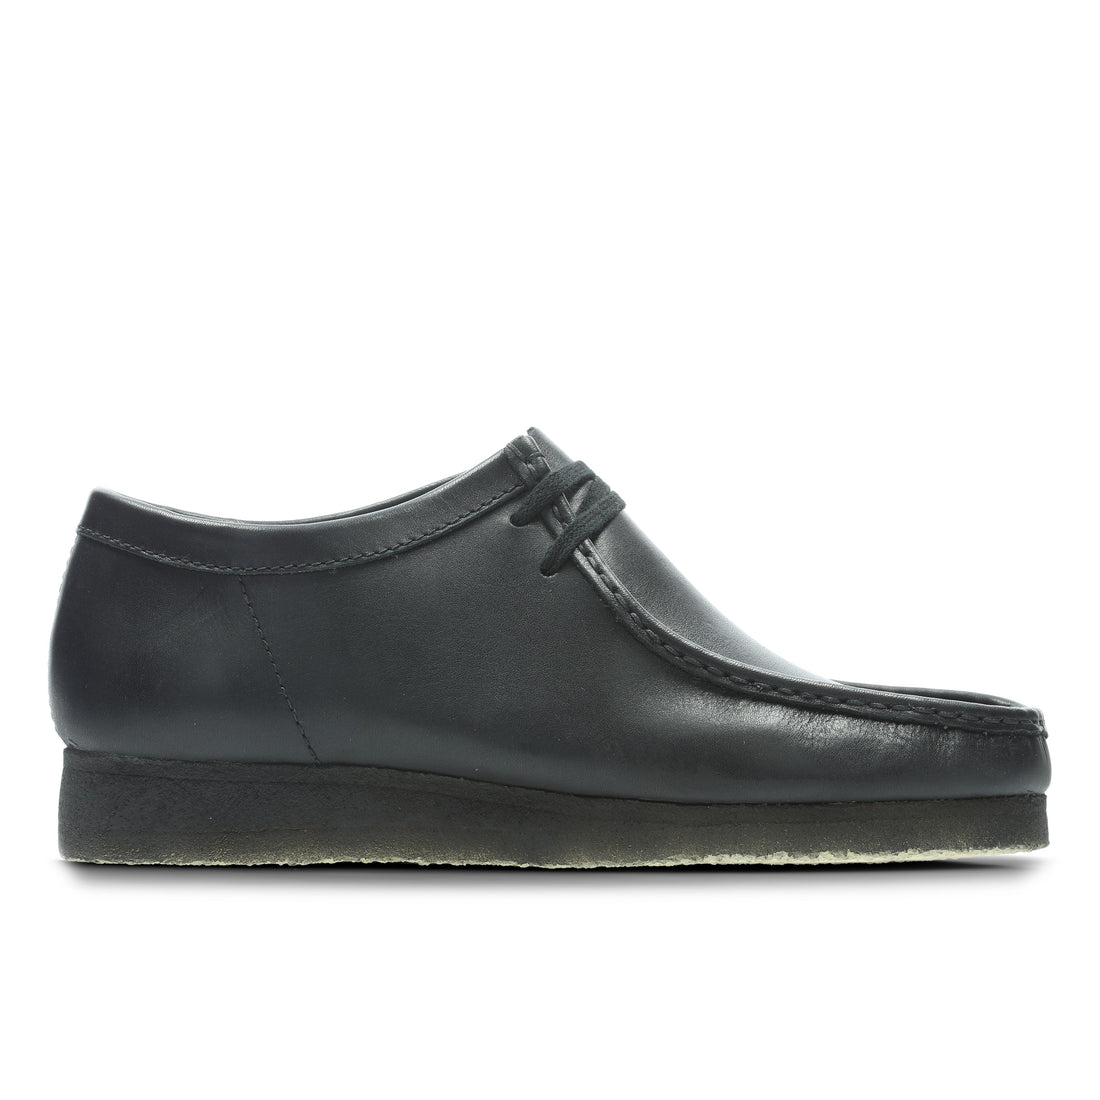 CLARKS - WALLABEE - BLACK LEATHER